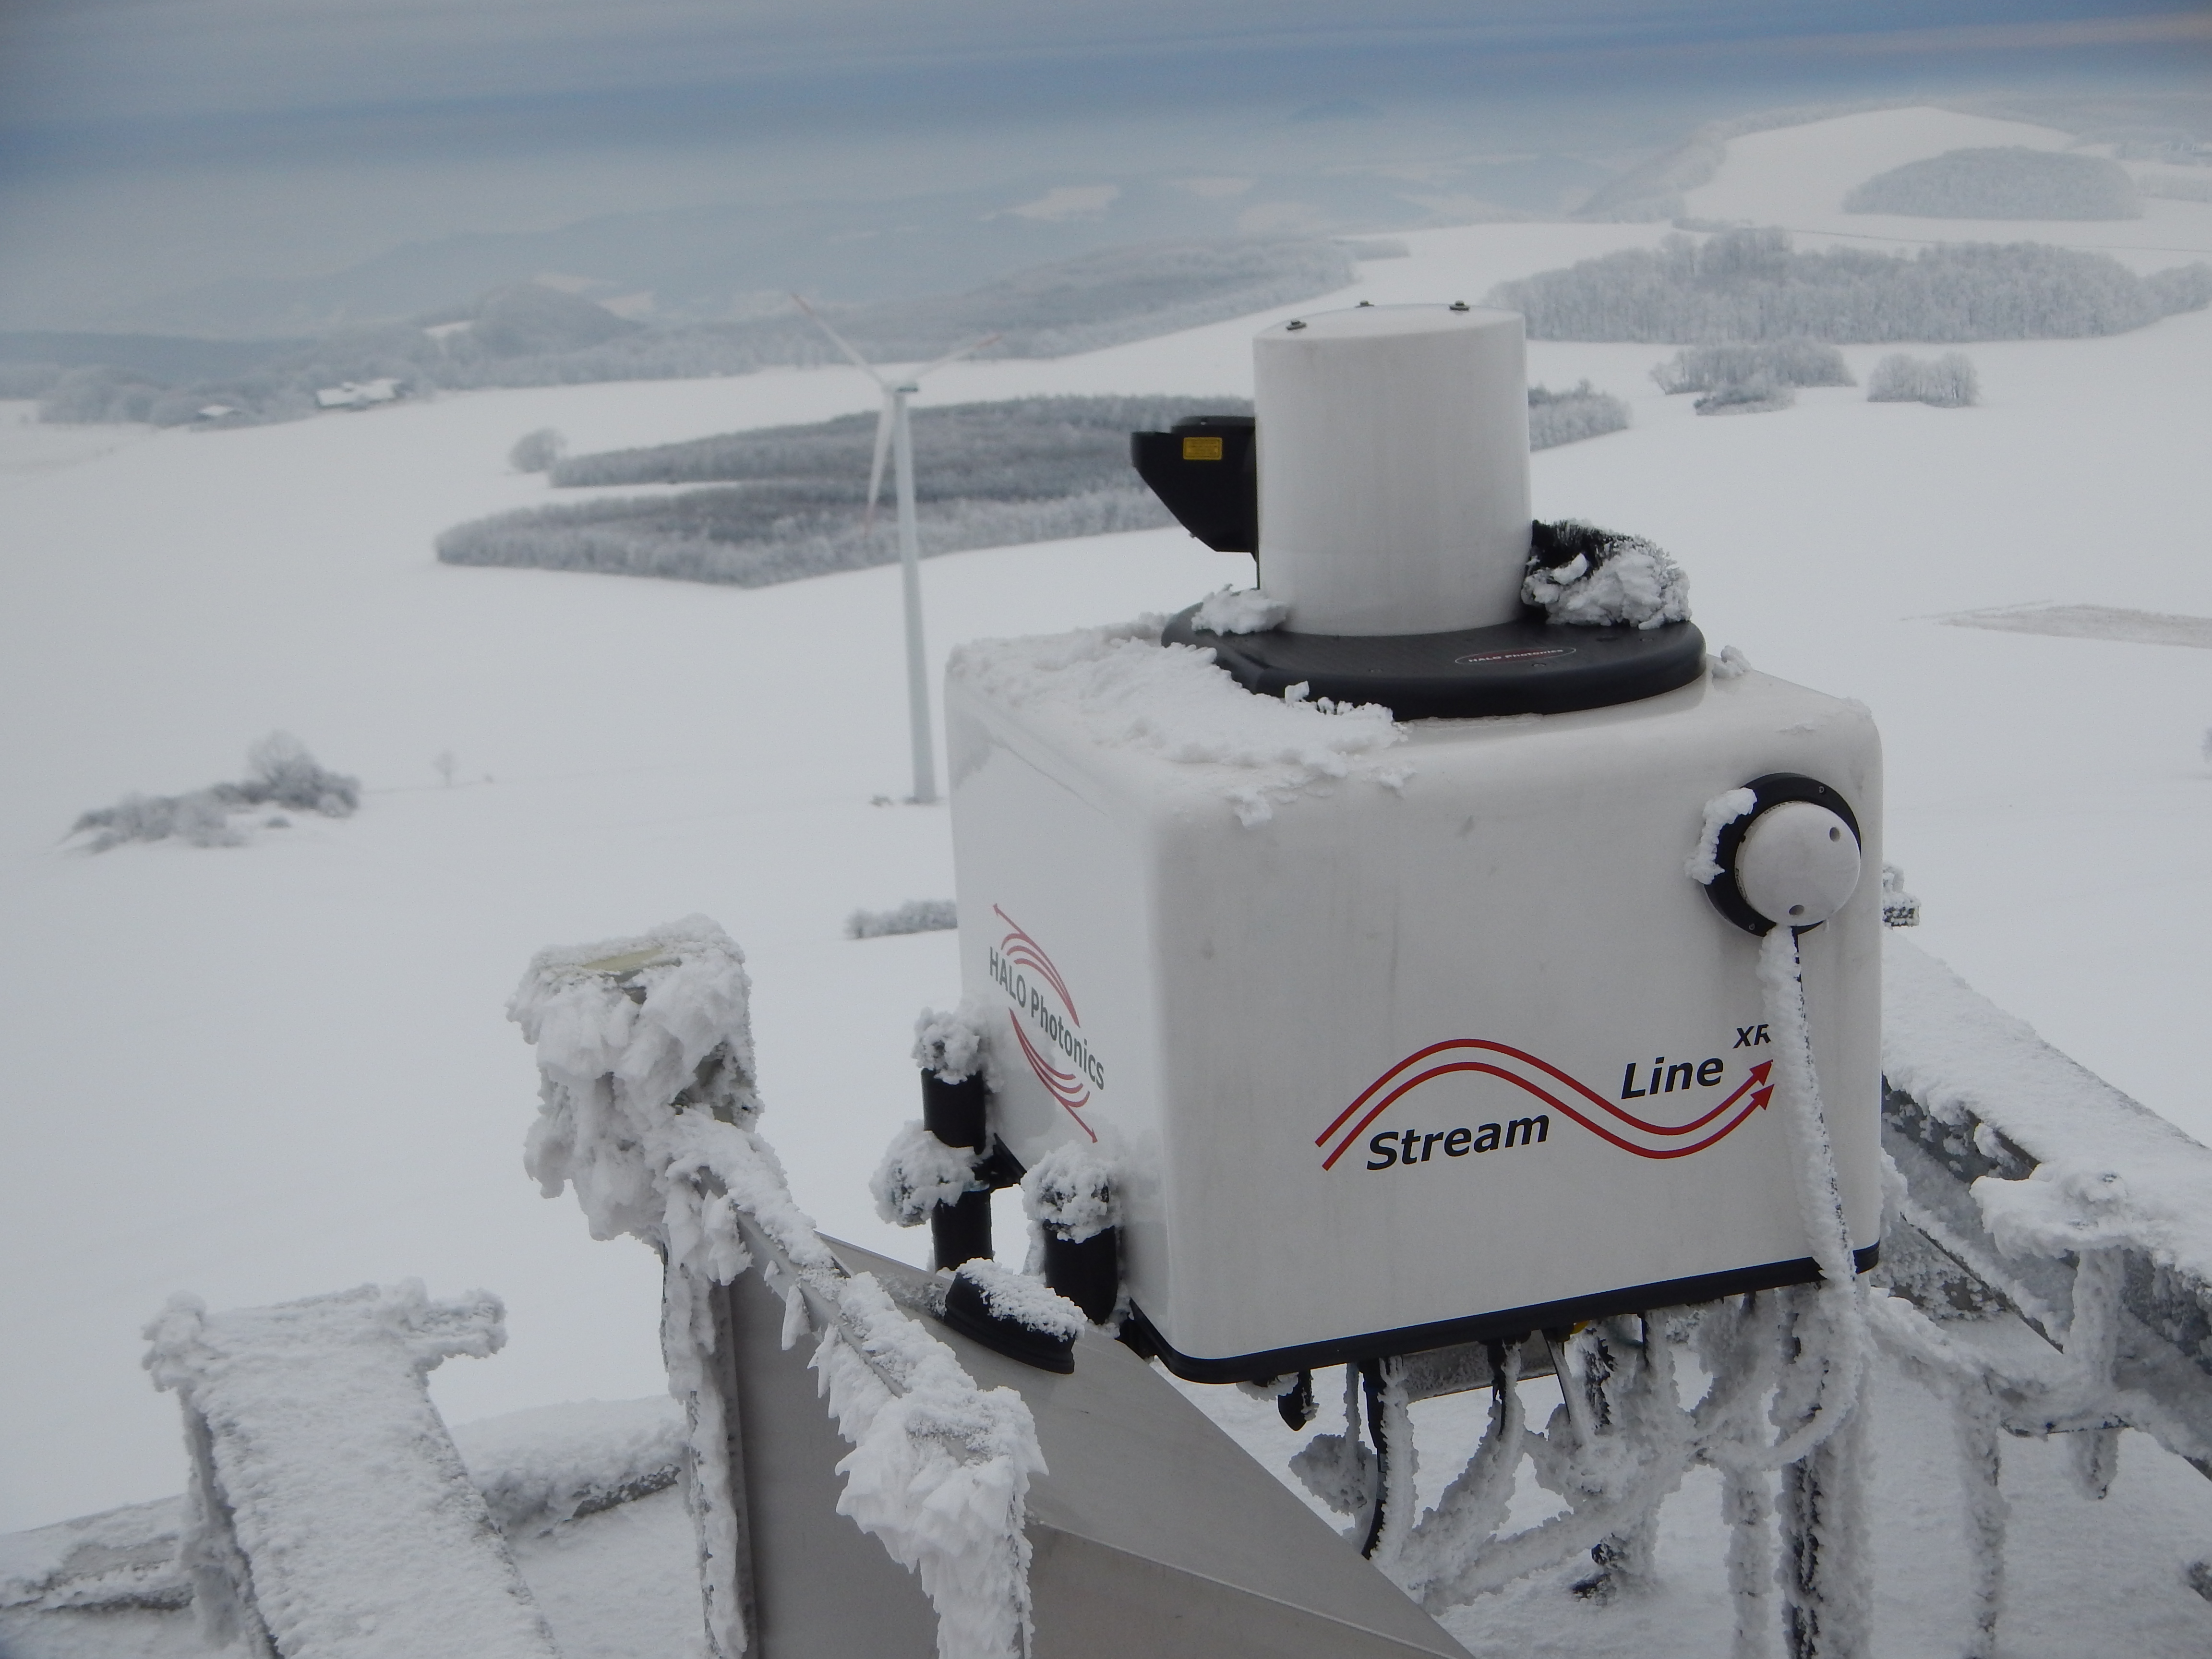 A wind lidar covered in ice